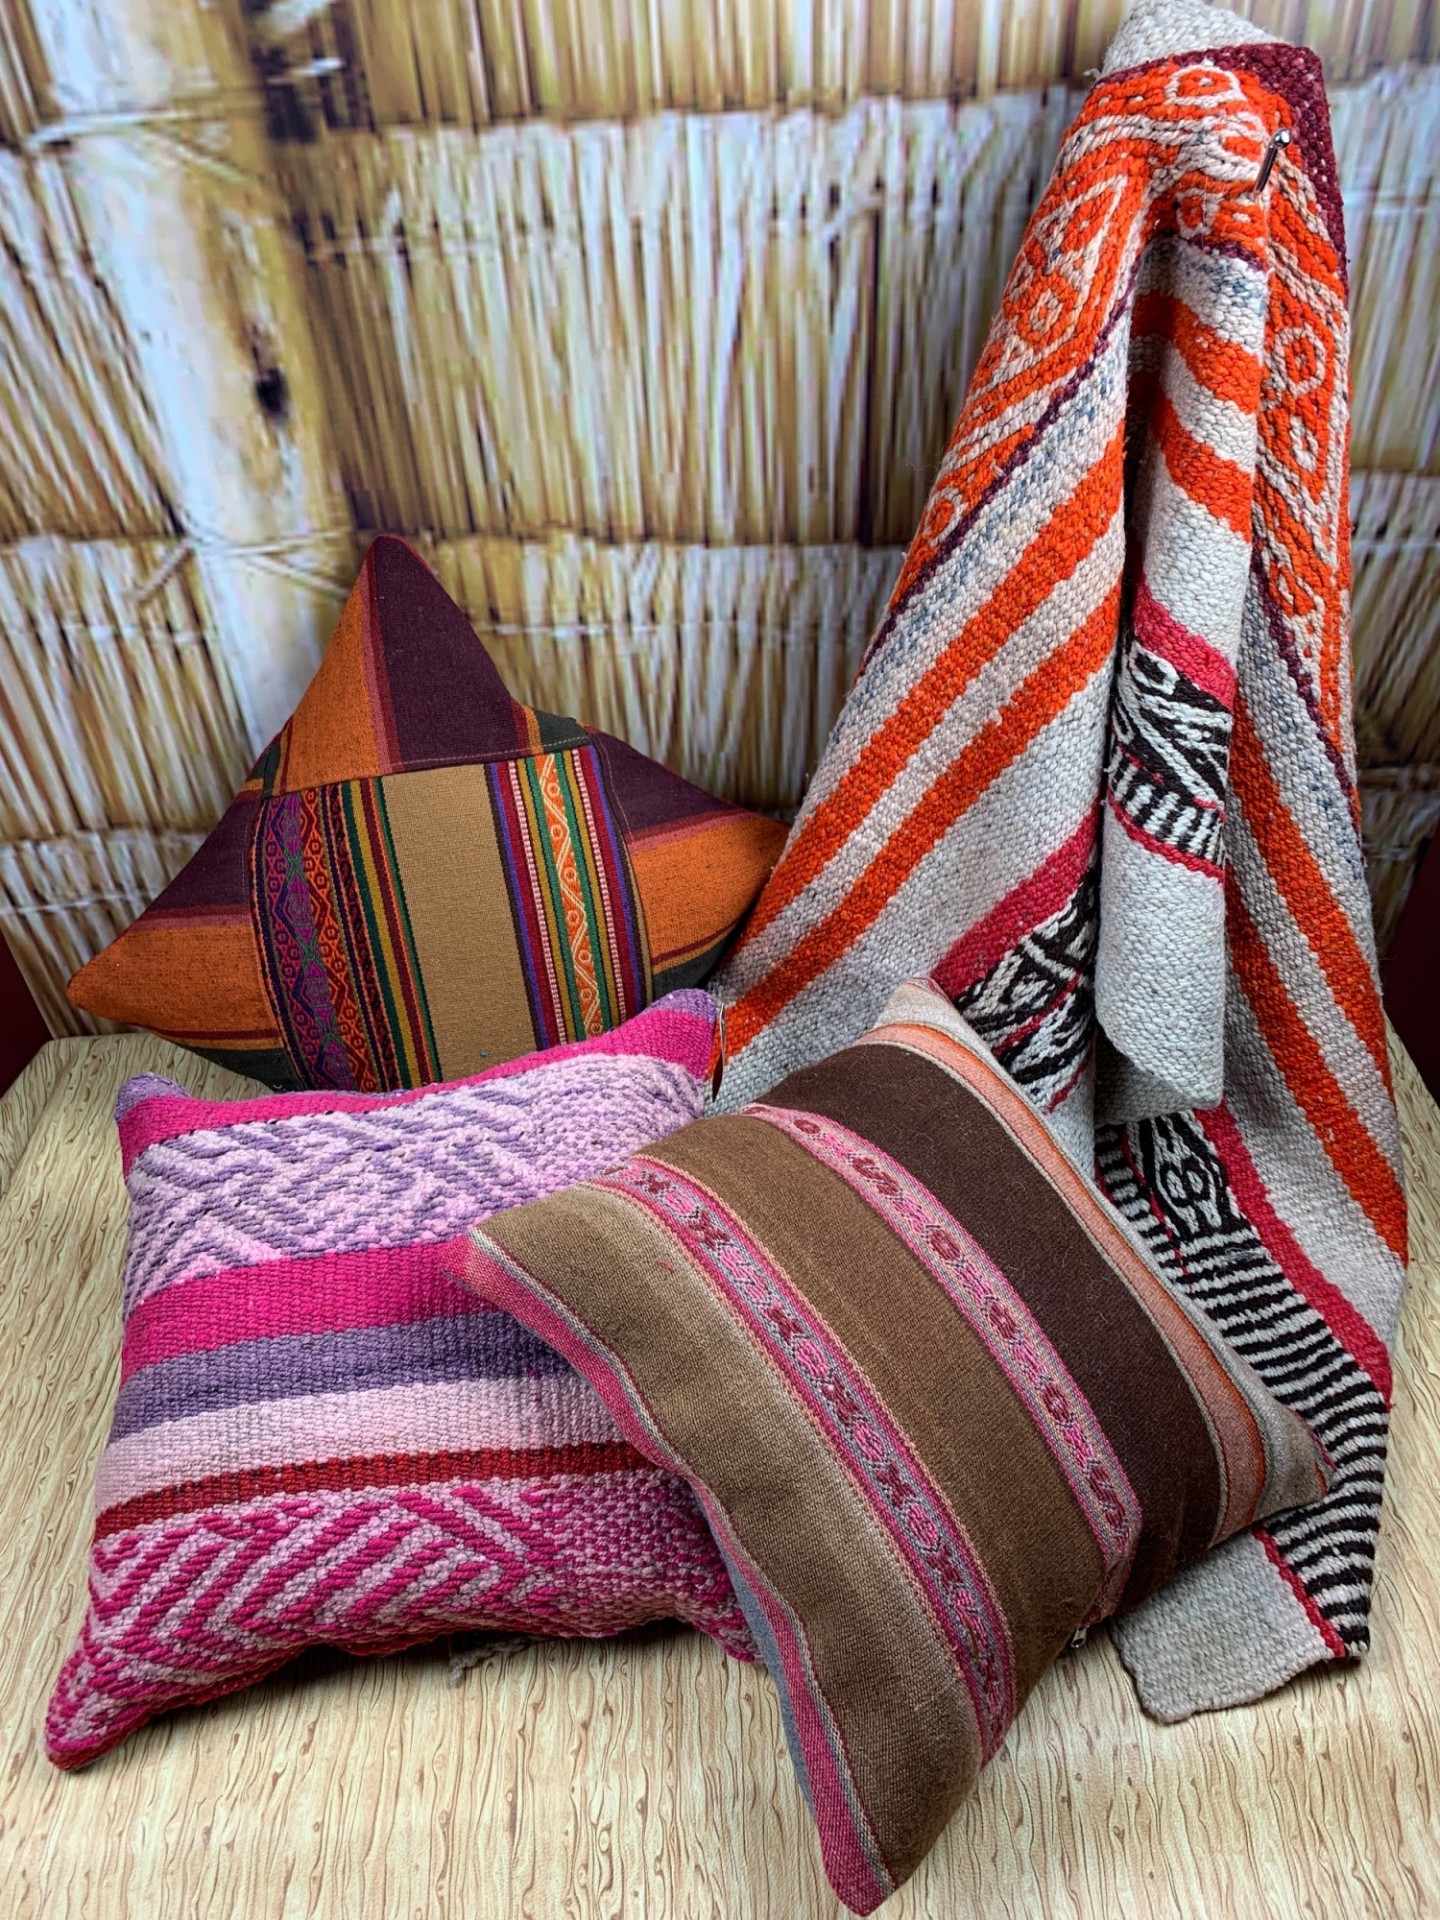 Three pillows and rug handcrafted with several colors mixed throughout